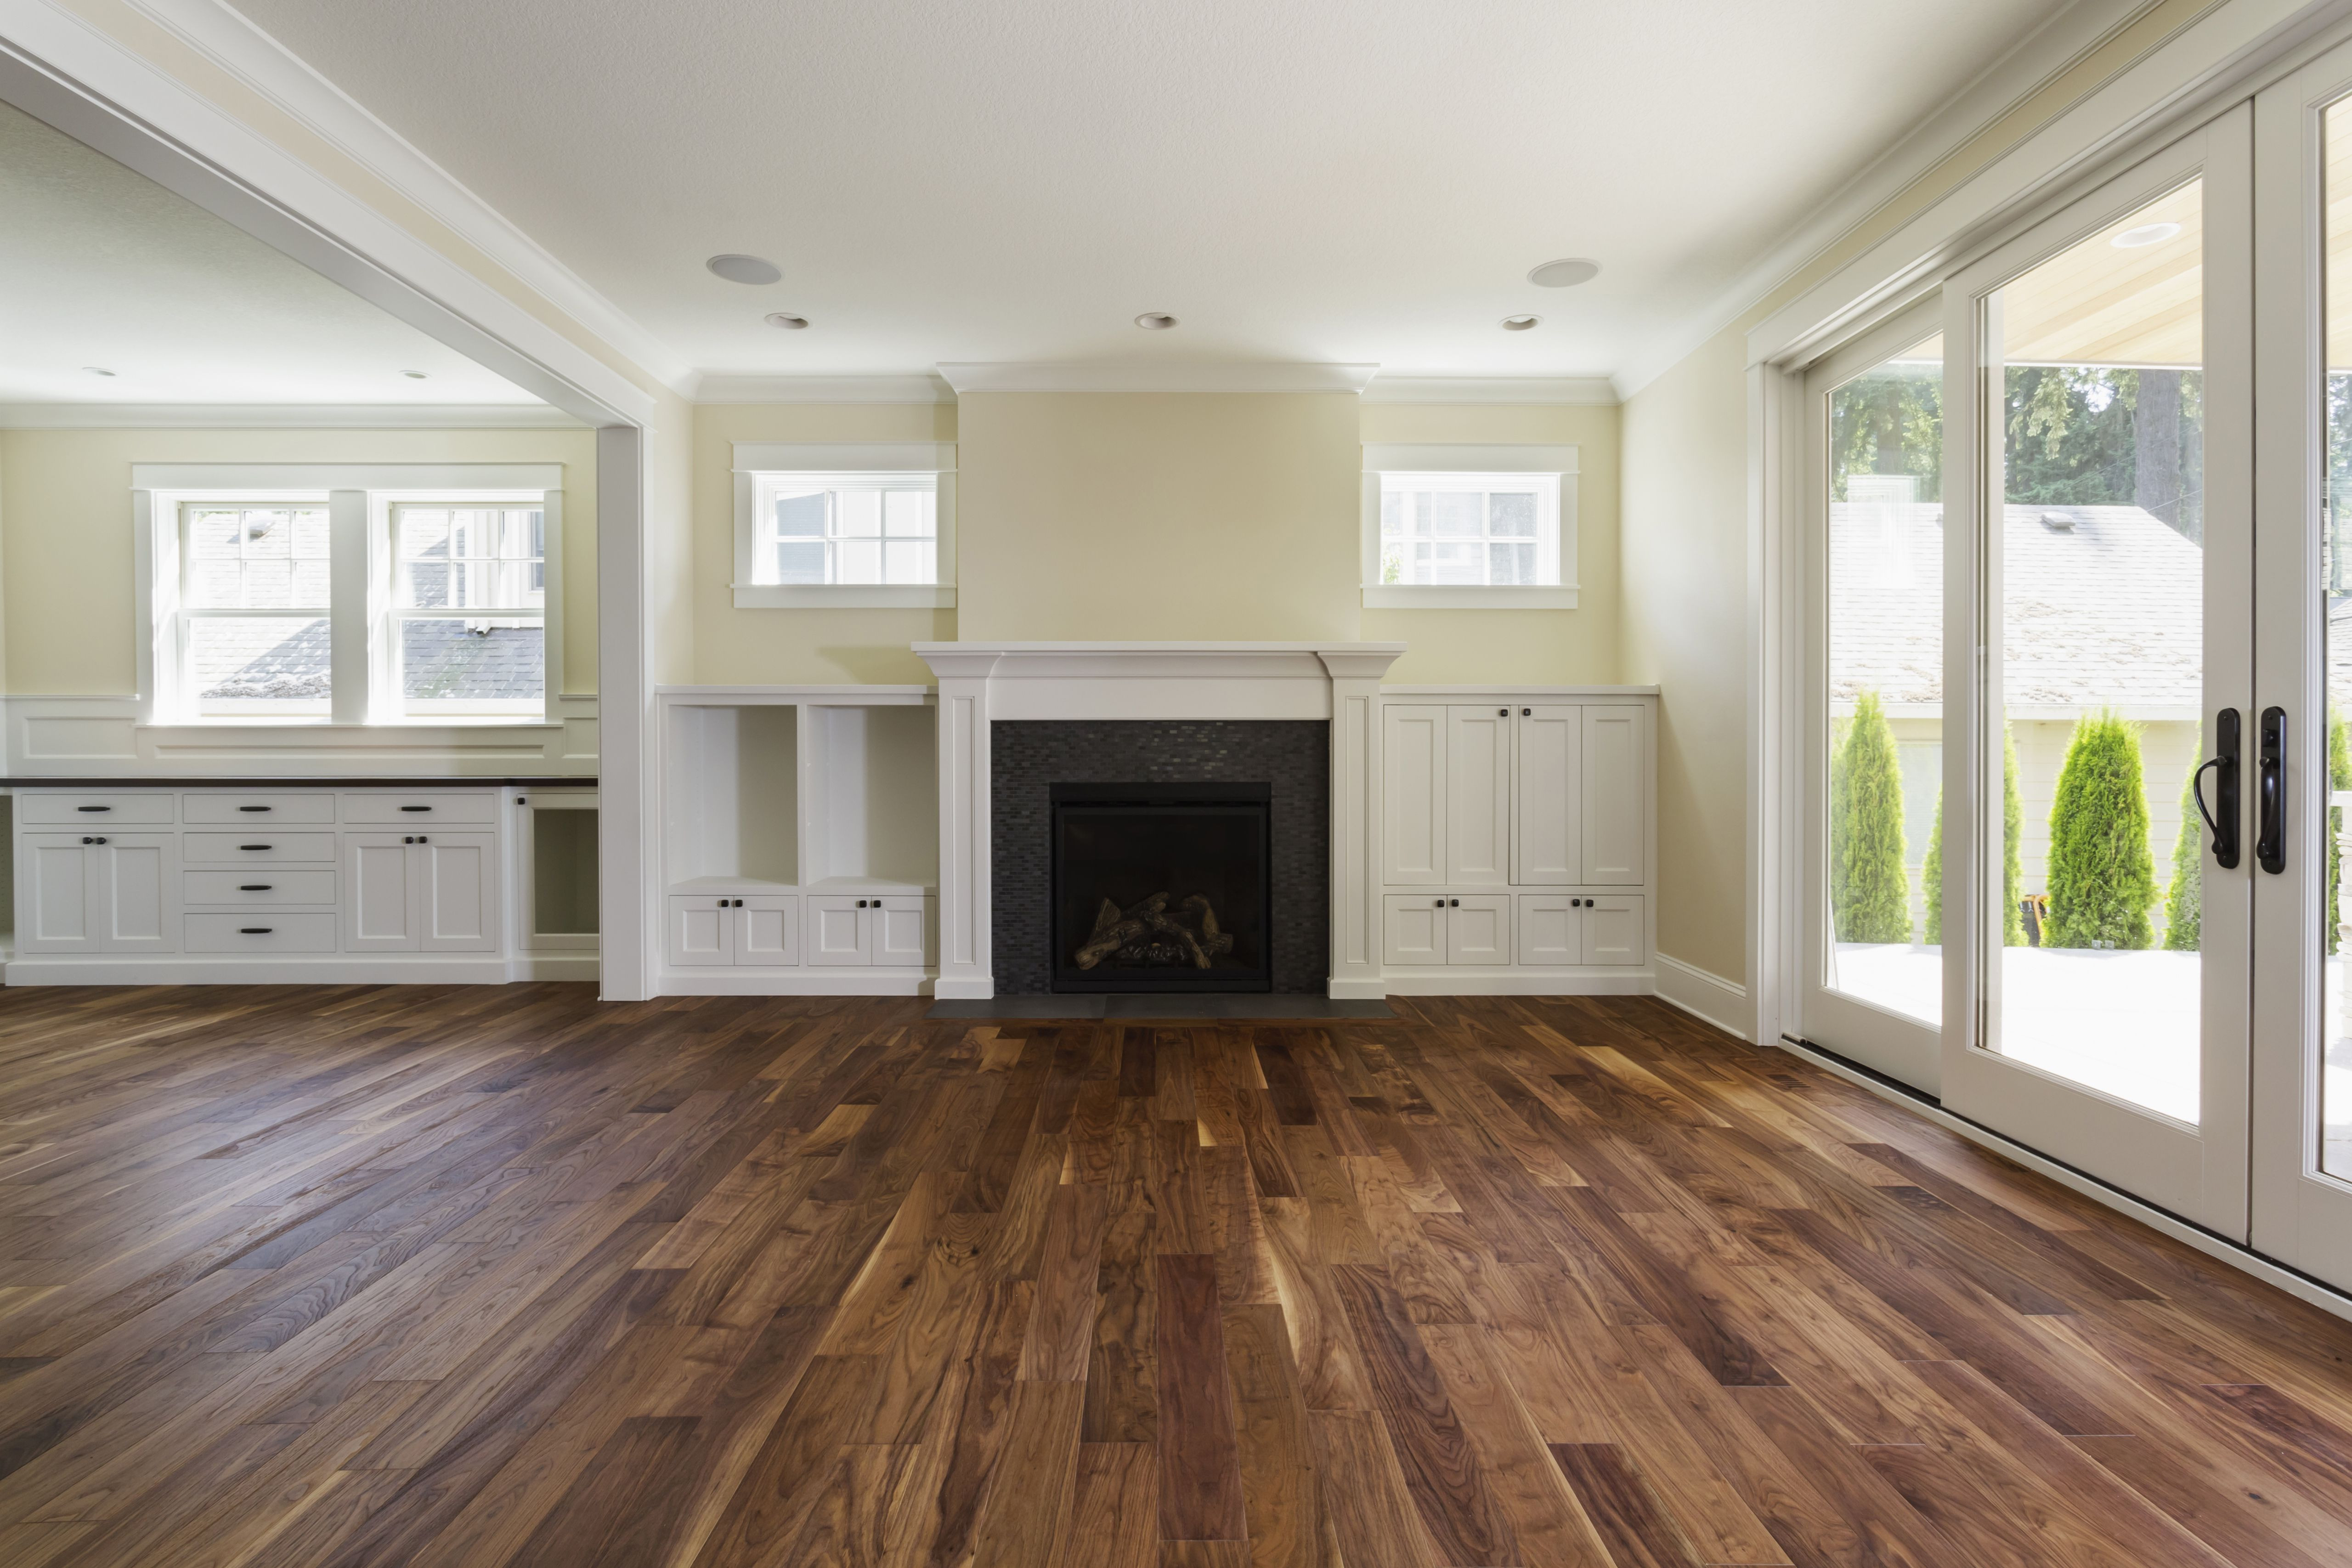 15 Perfect somerset White Oak Hardwood Flooring 2024 free download somerset white oak hardwood flooring of the pros and cons of prefinished hardwood flooring within fireplace and built in shelves in living room 482143011 57bef8e33df78cc16e035397